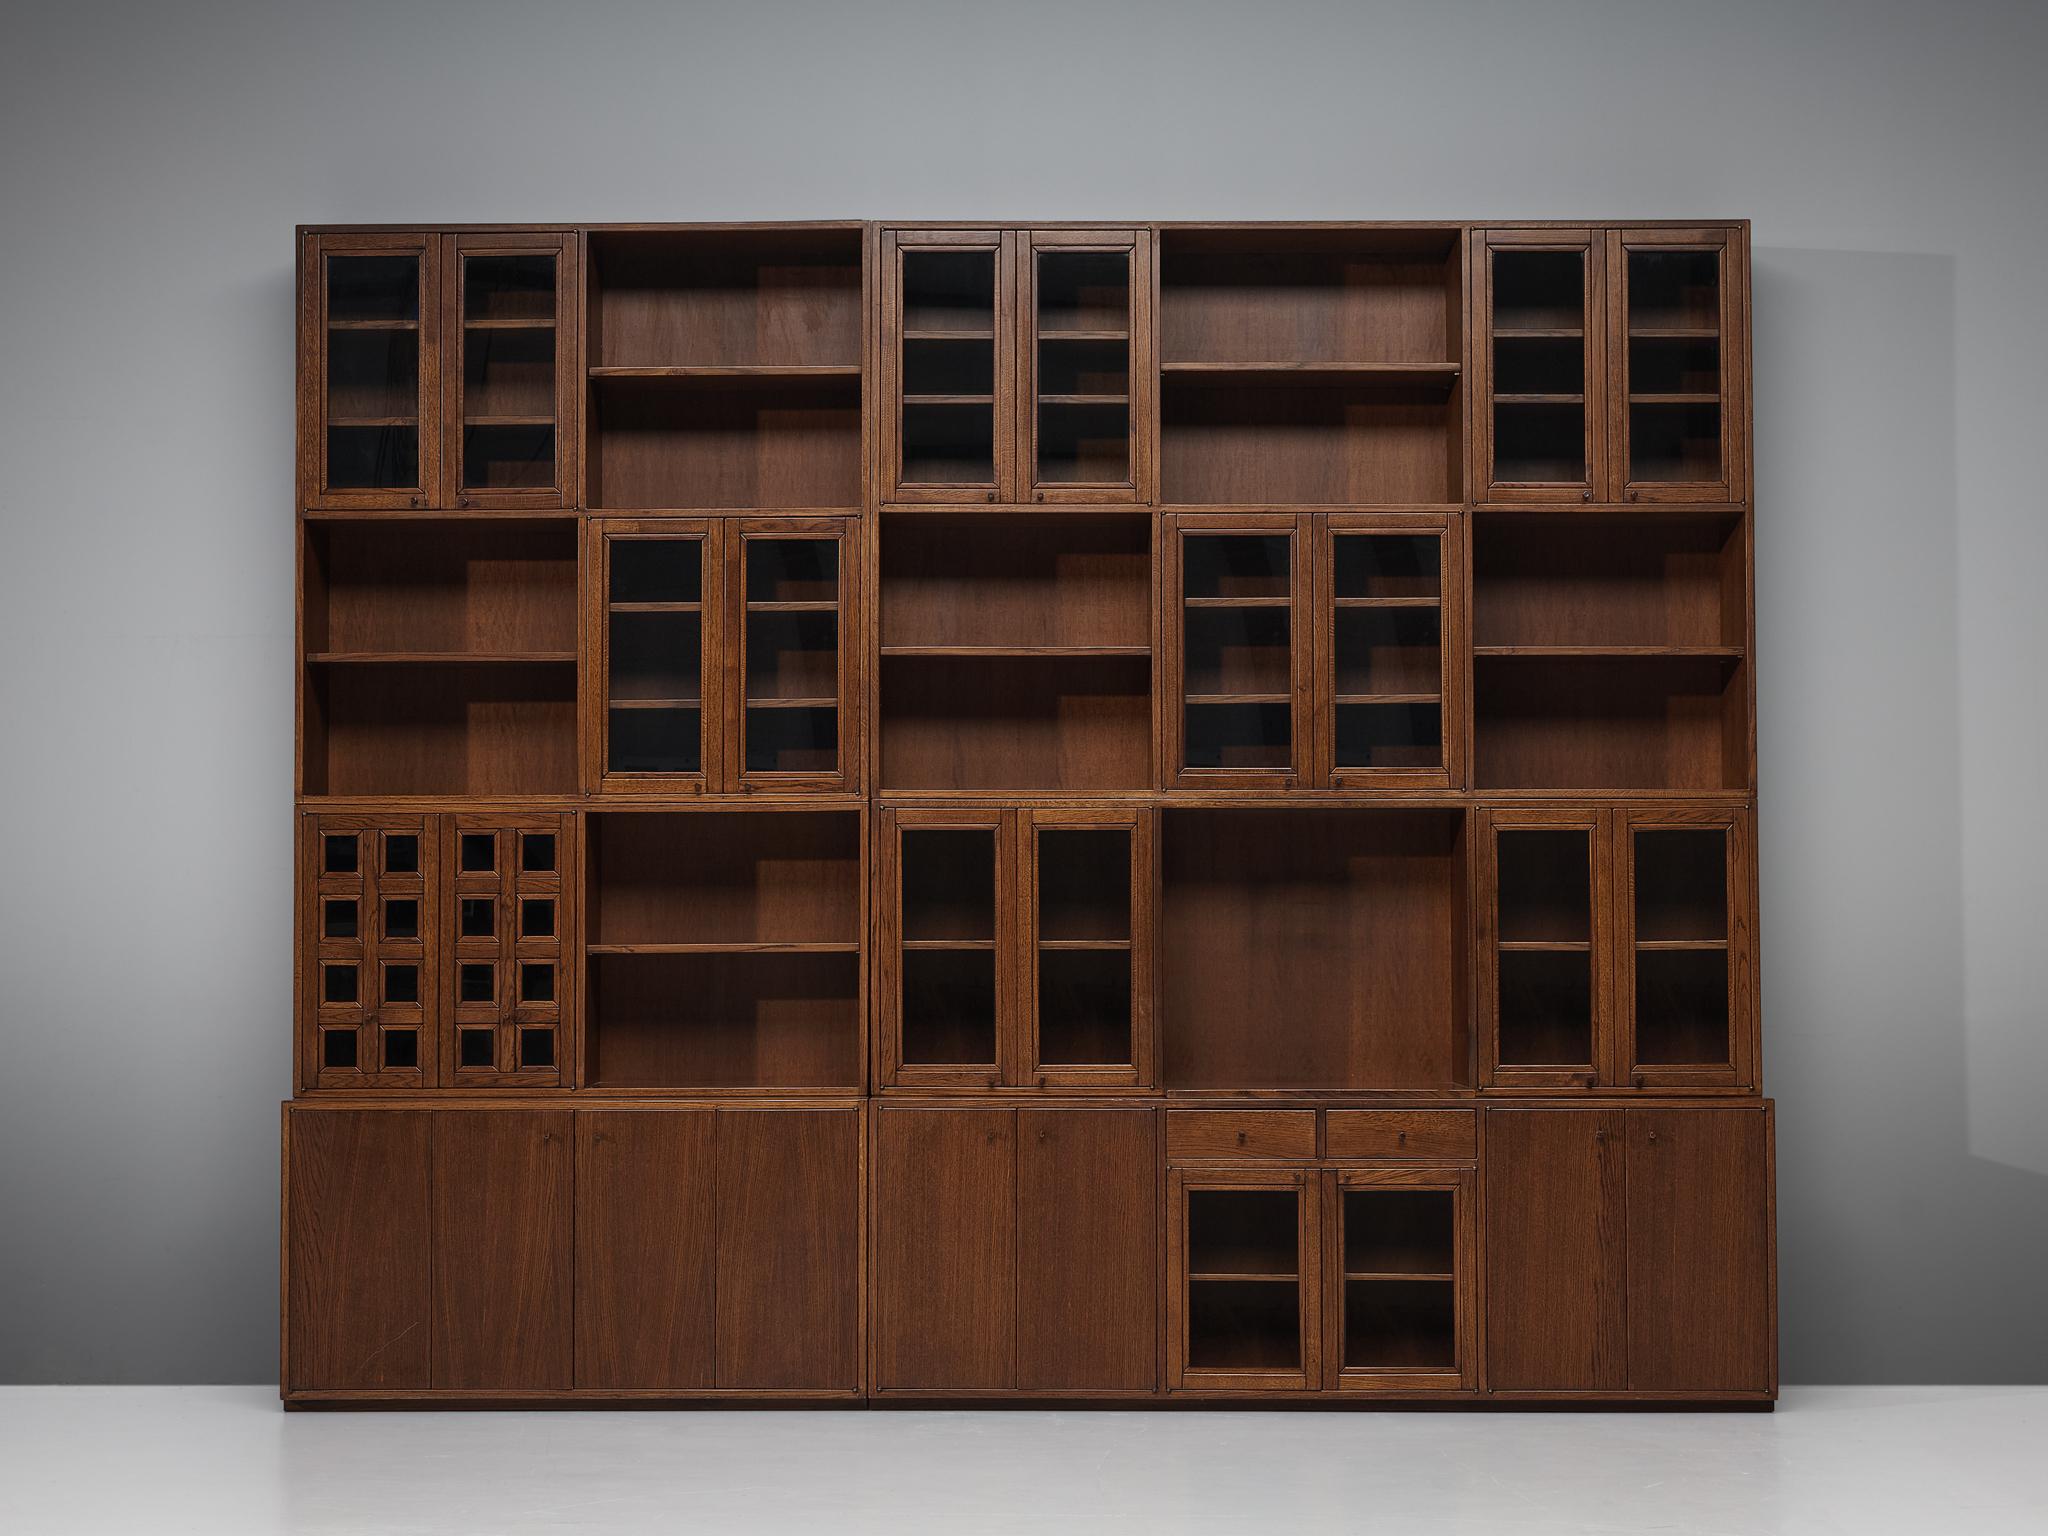 Giuseppe Rivadossi, pair of cabinets, oak, glass, Italy, 1975.

An exceptional library unit by the Italian sculptor and designer Giuseppe Rivadossi, featuring a high level of craftsmanship in woodwork. The two pieces combined create a wonderful wall